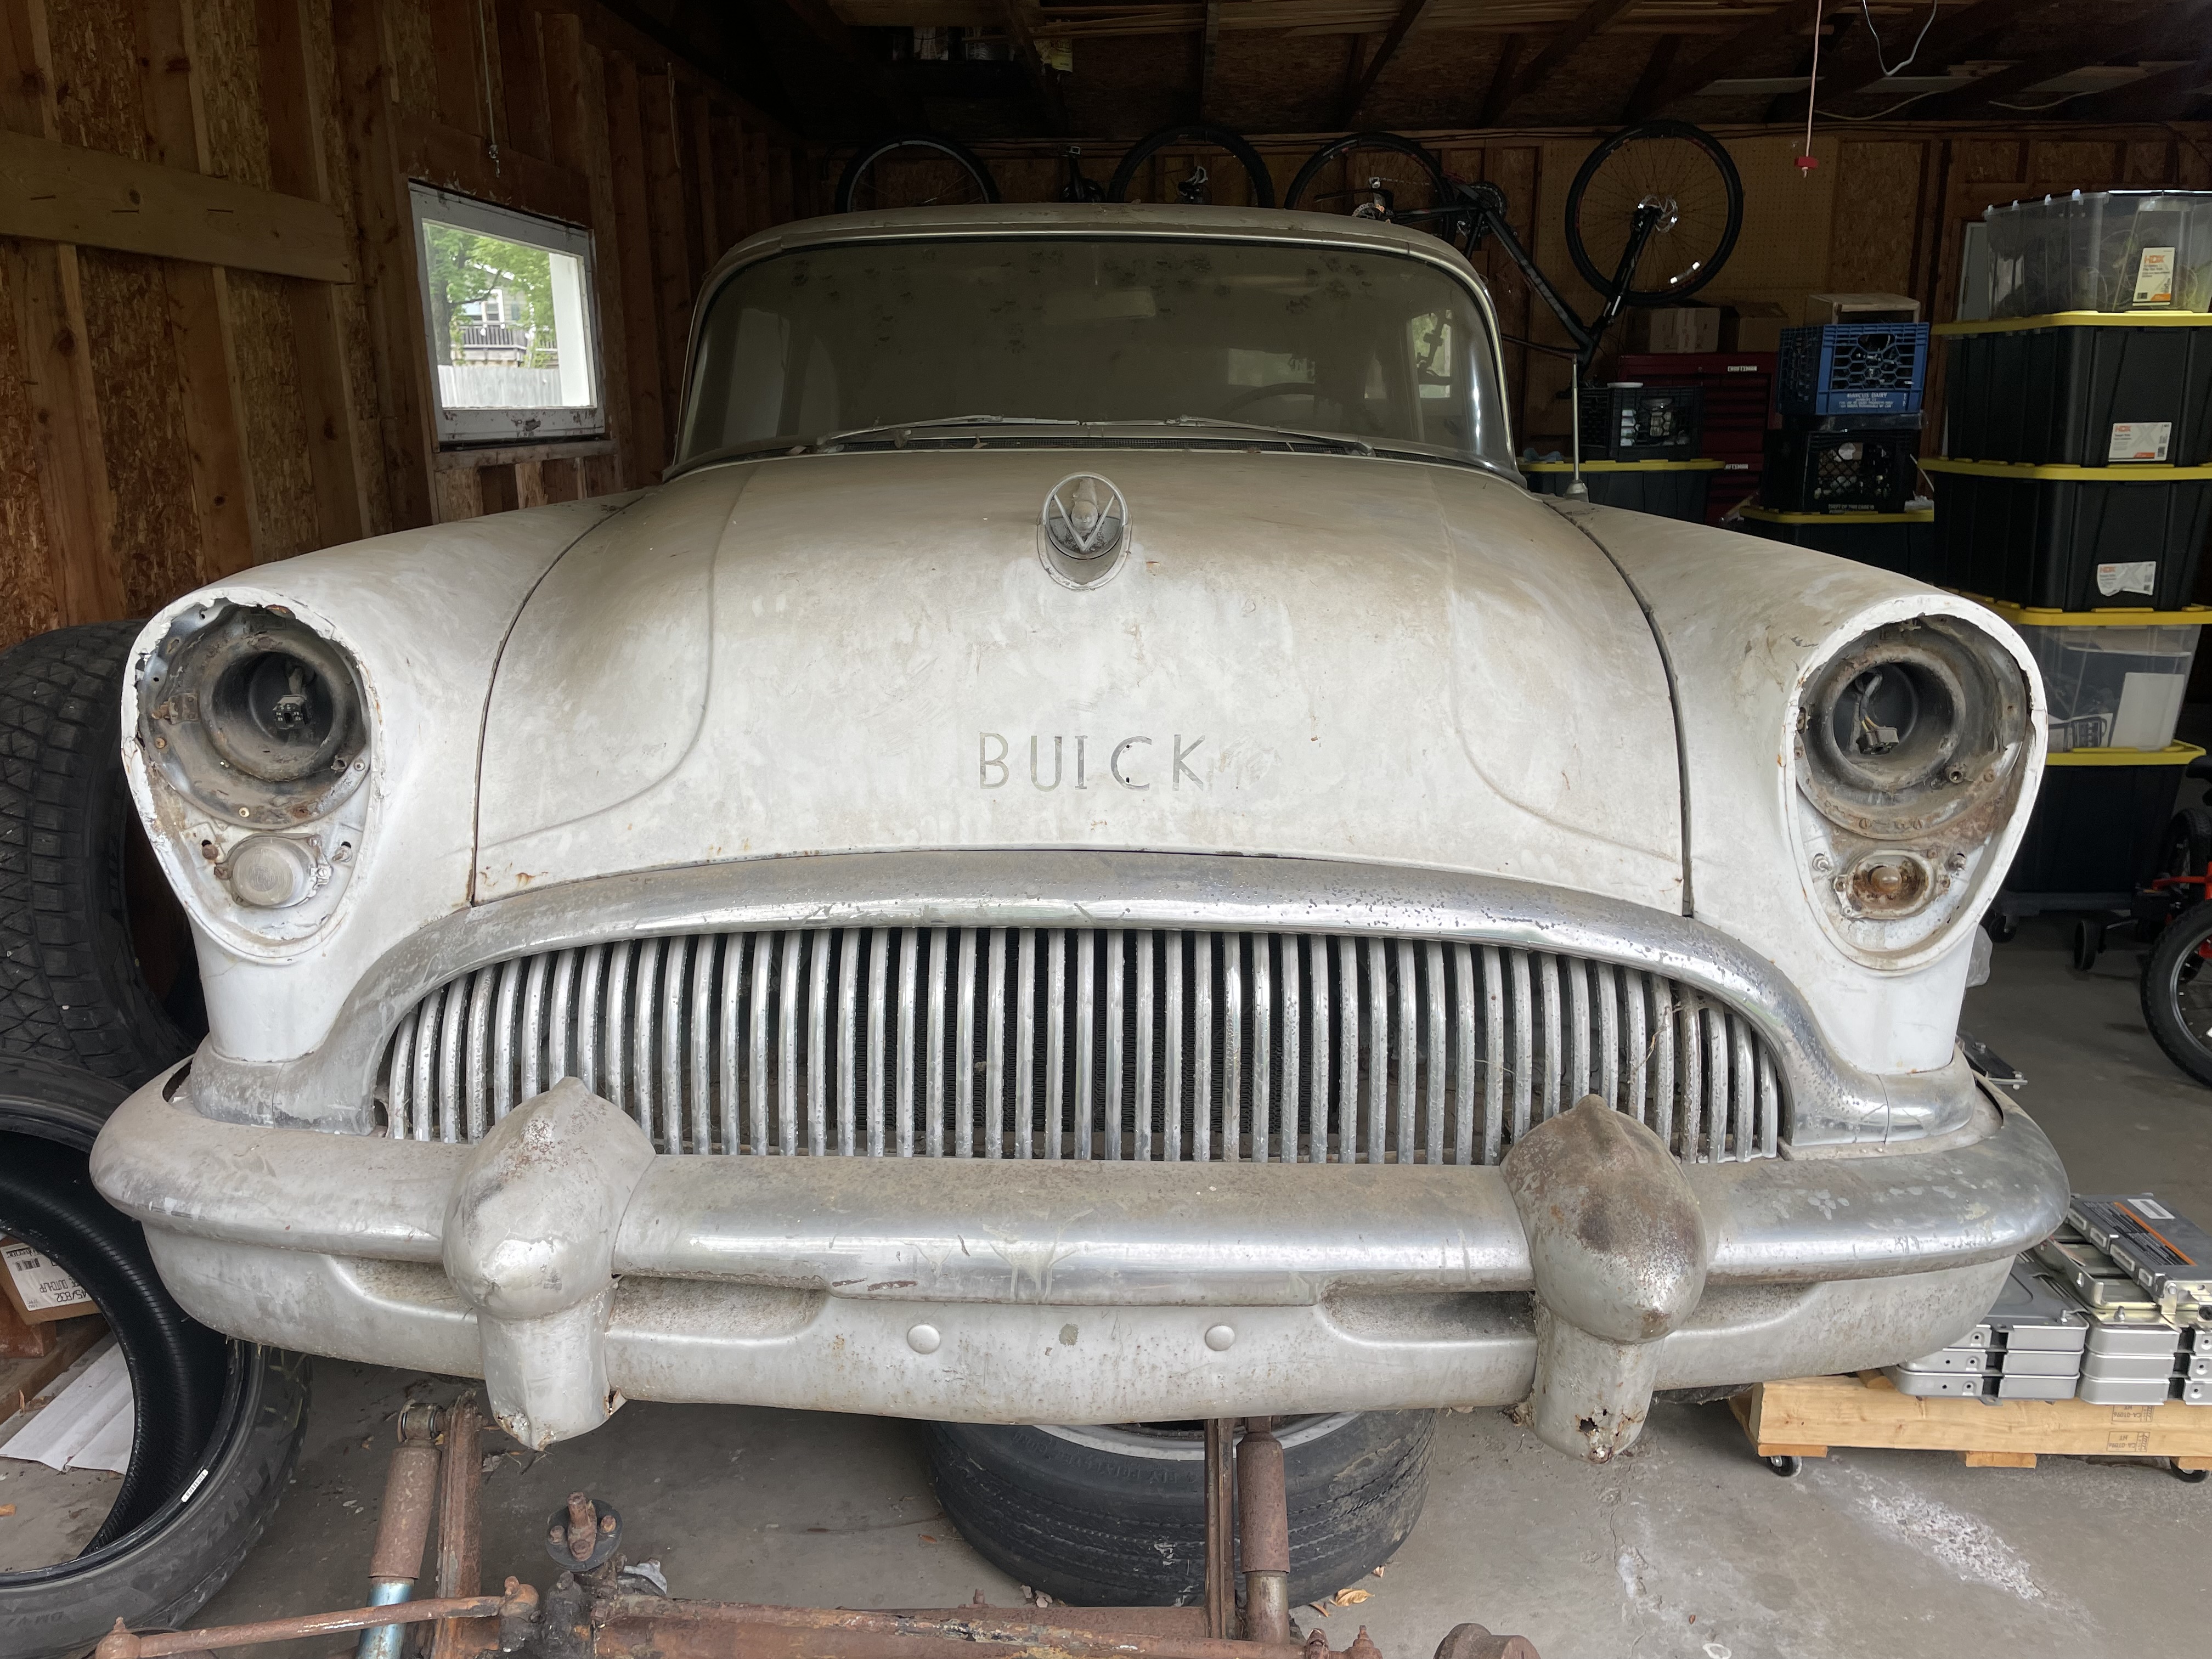 Why I Gave Away a Surprise 1954 Buick Special